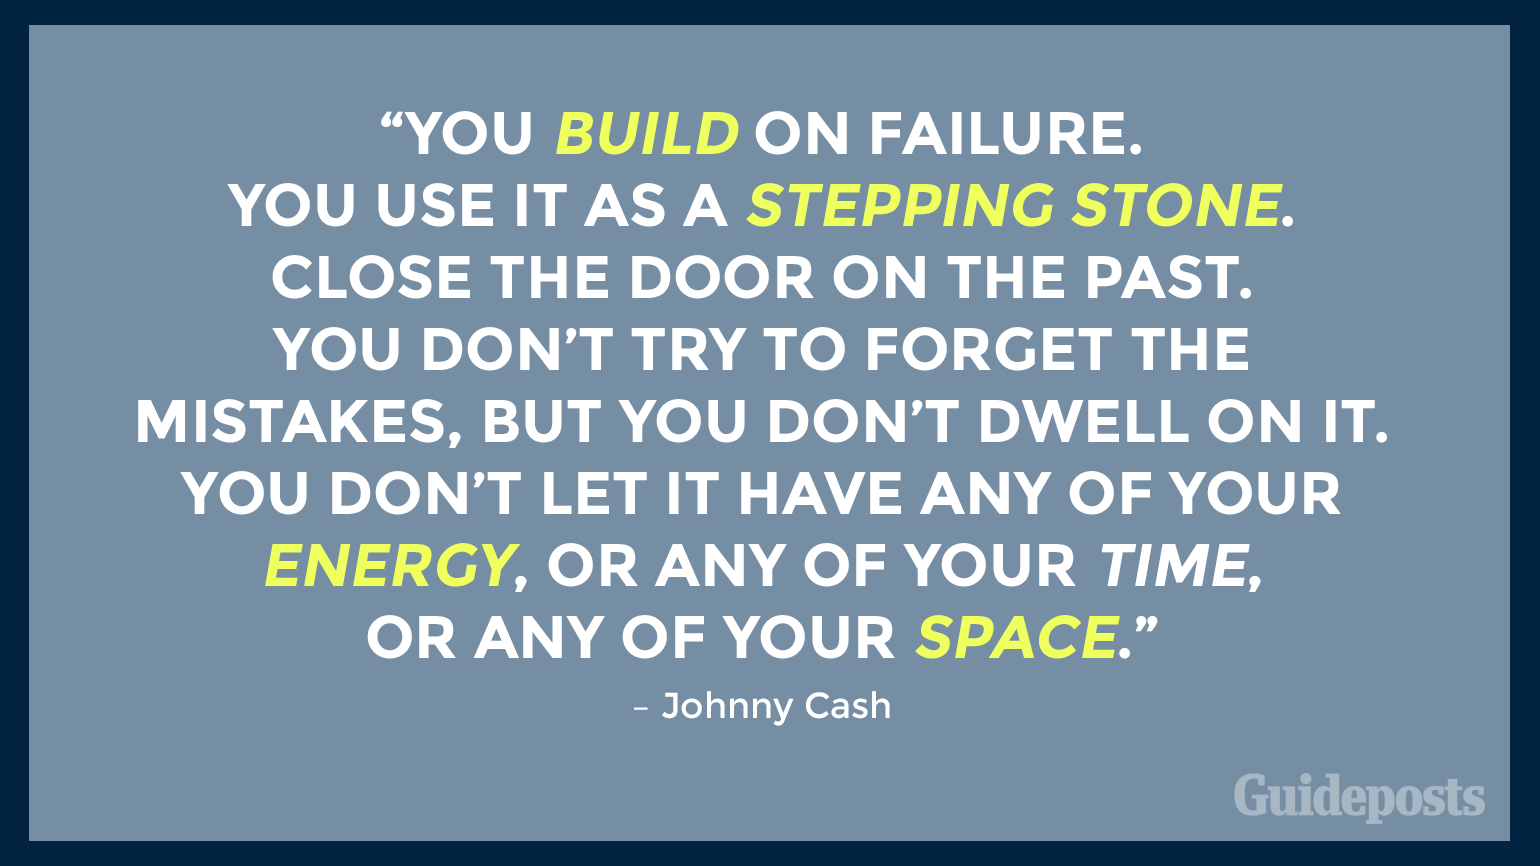 ou build on failure. You use it as a stepping stone. Close the door on the past. You don’t try to forget the mistakes, but you don’t dwell on it. You don’t let it have any of your energy, or any of your time, or any of your space.” – Johnny Cash